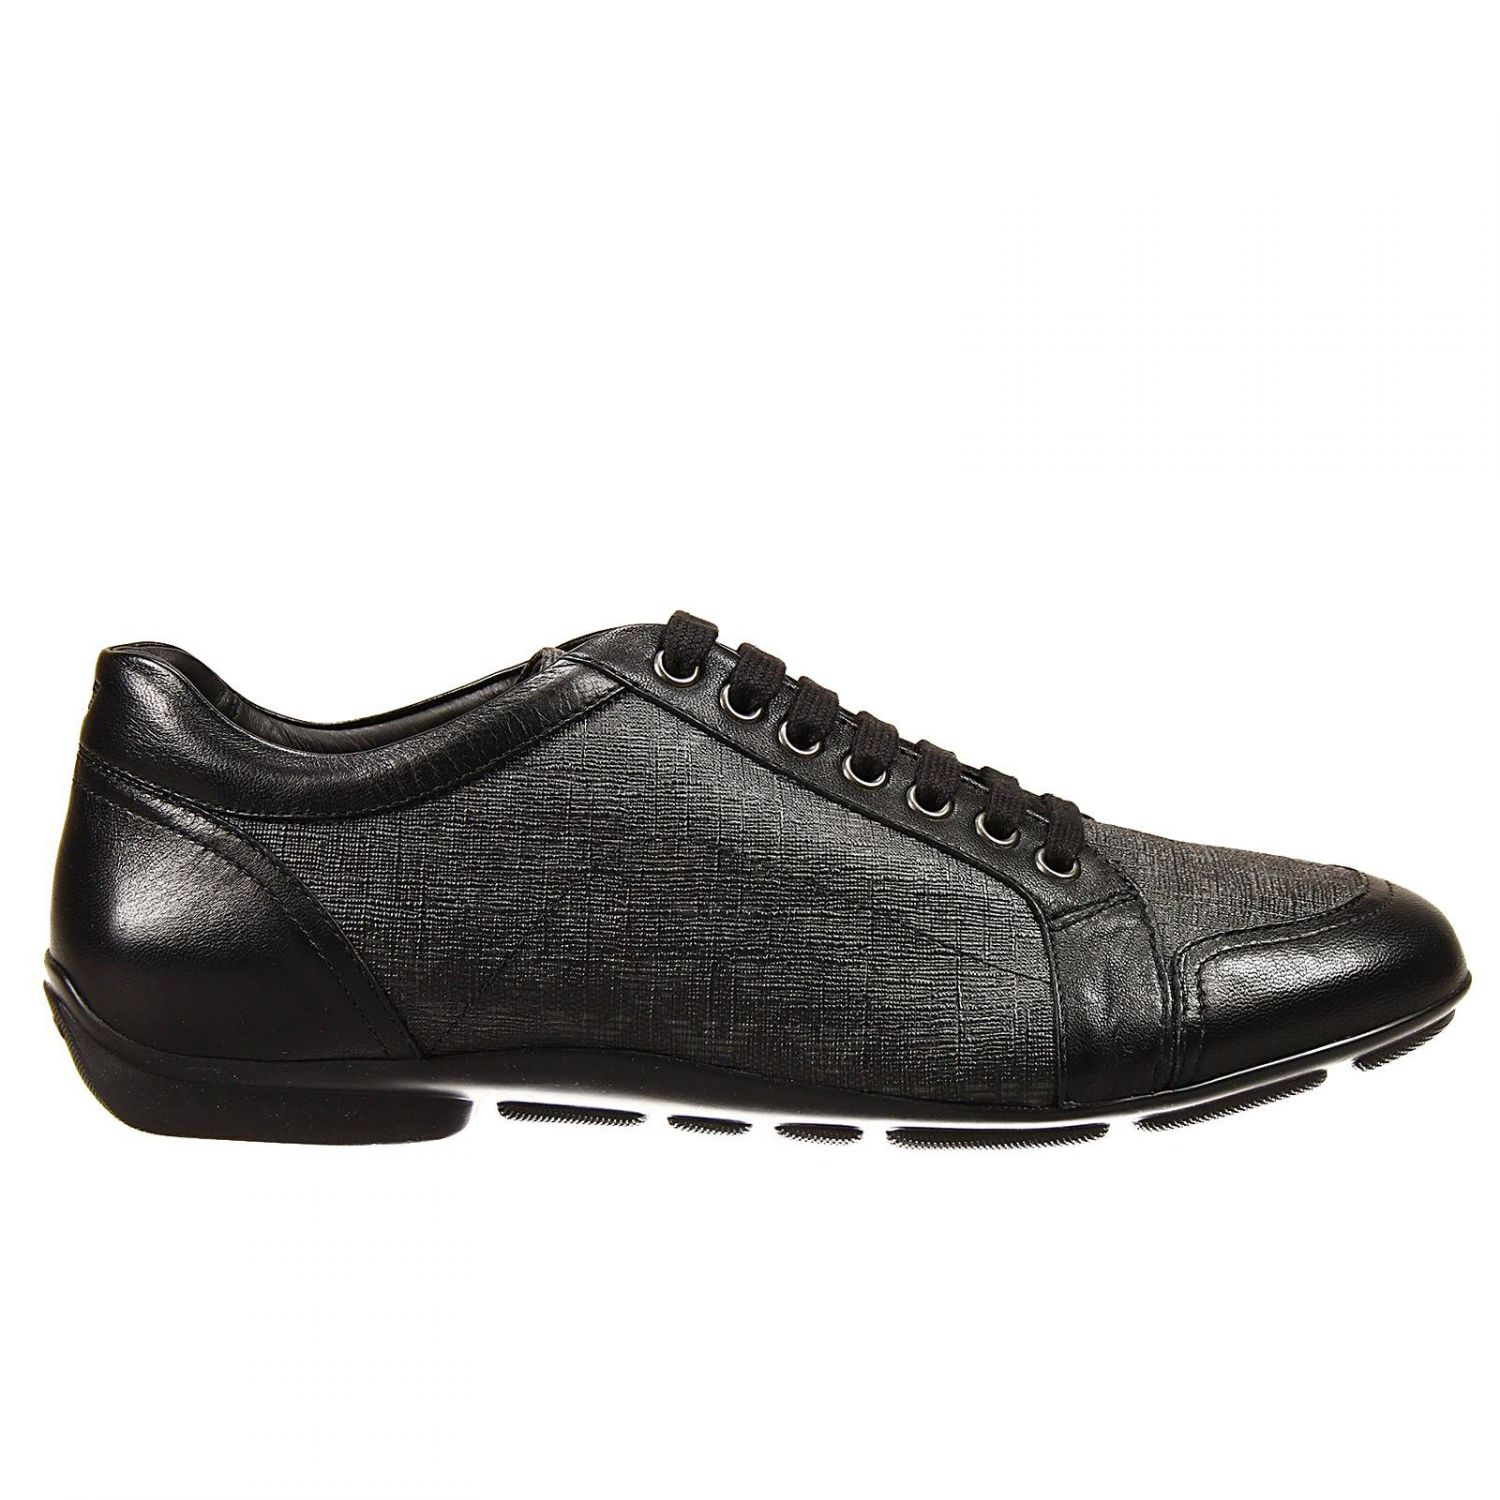 Giorgio Armani Lace Up Shoes Sneakers Logo All Over in Black for Men - Lyst